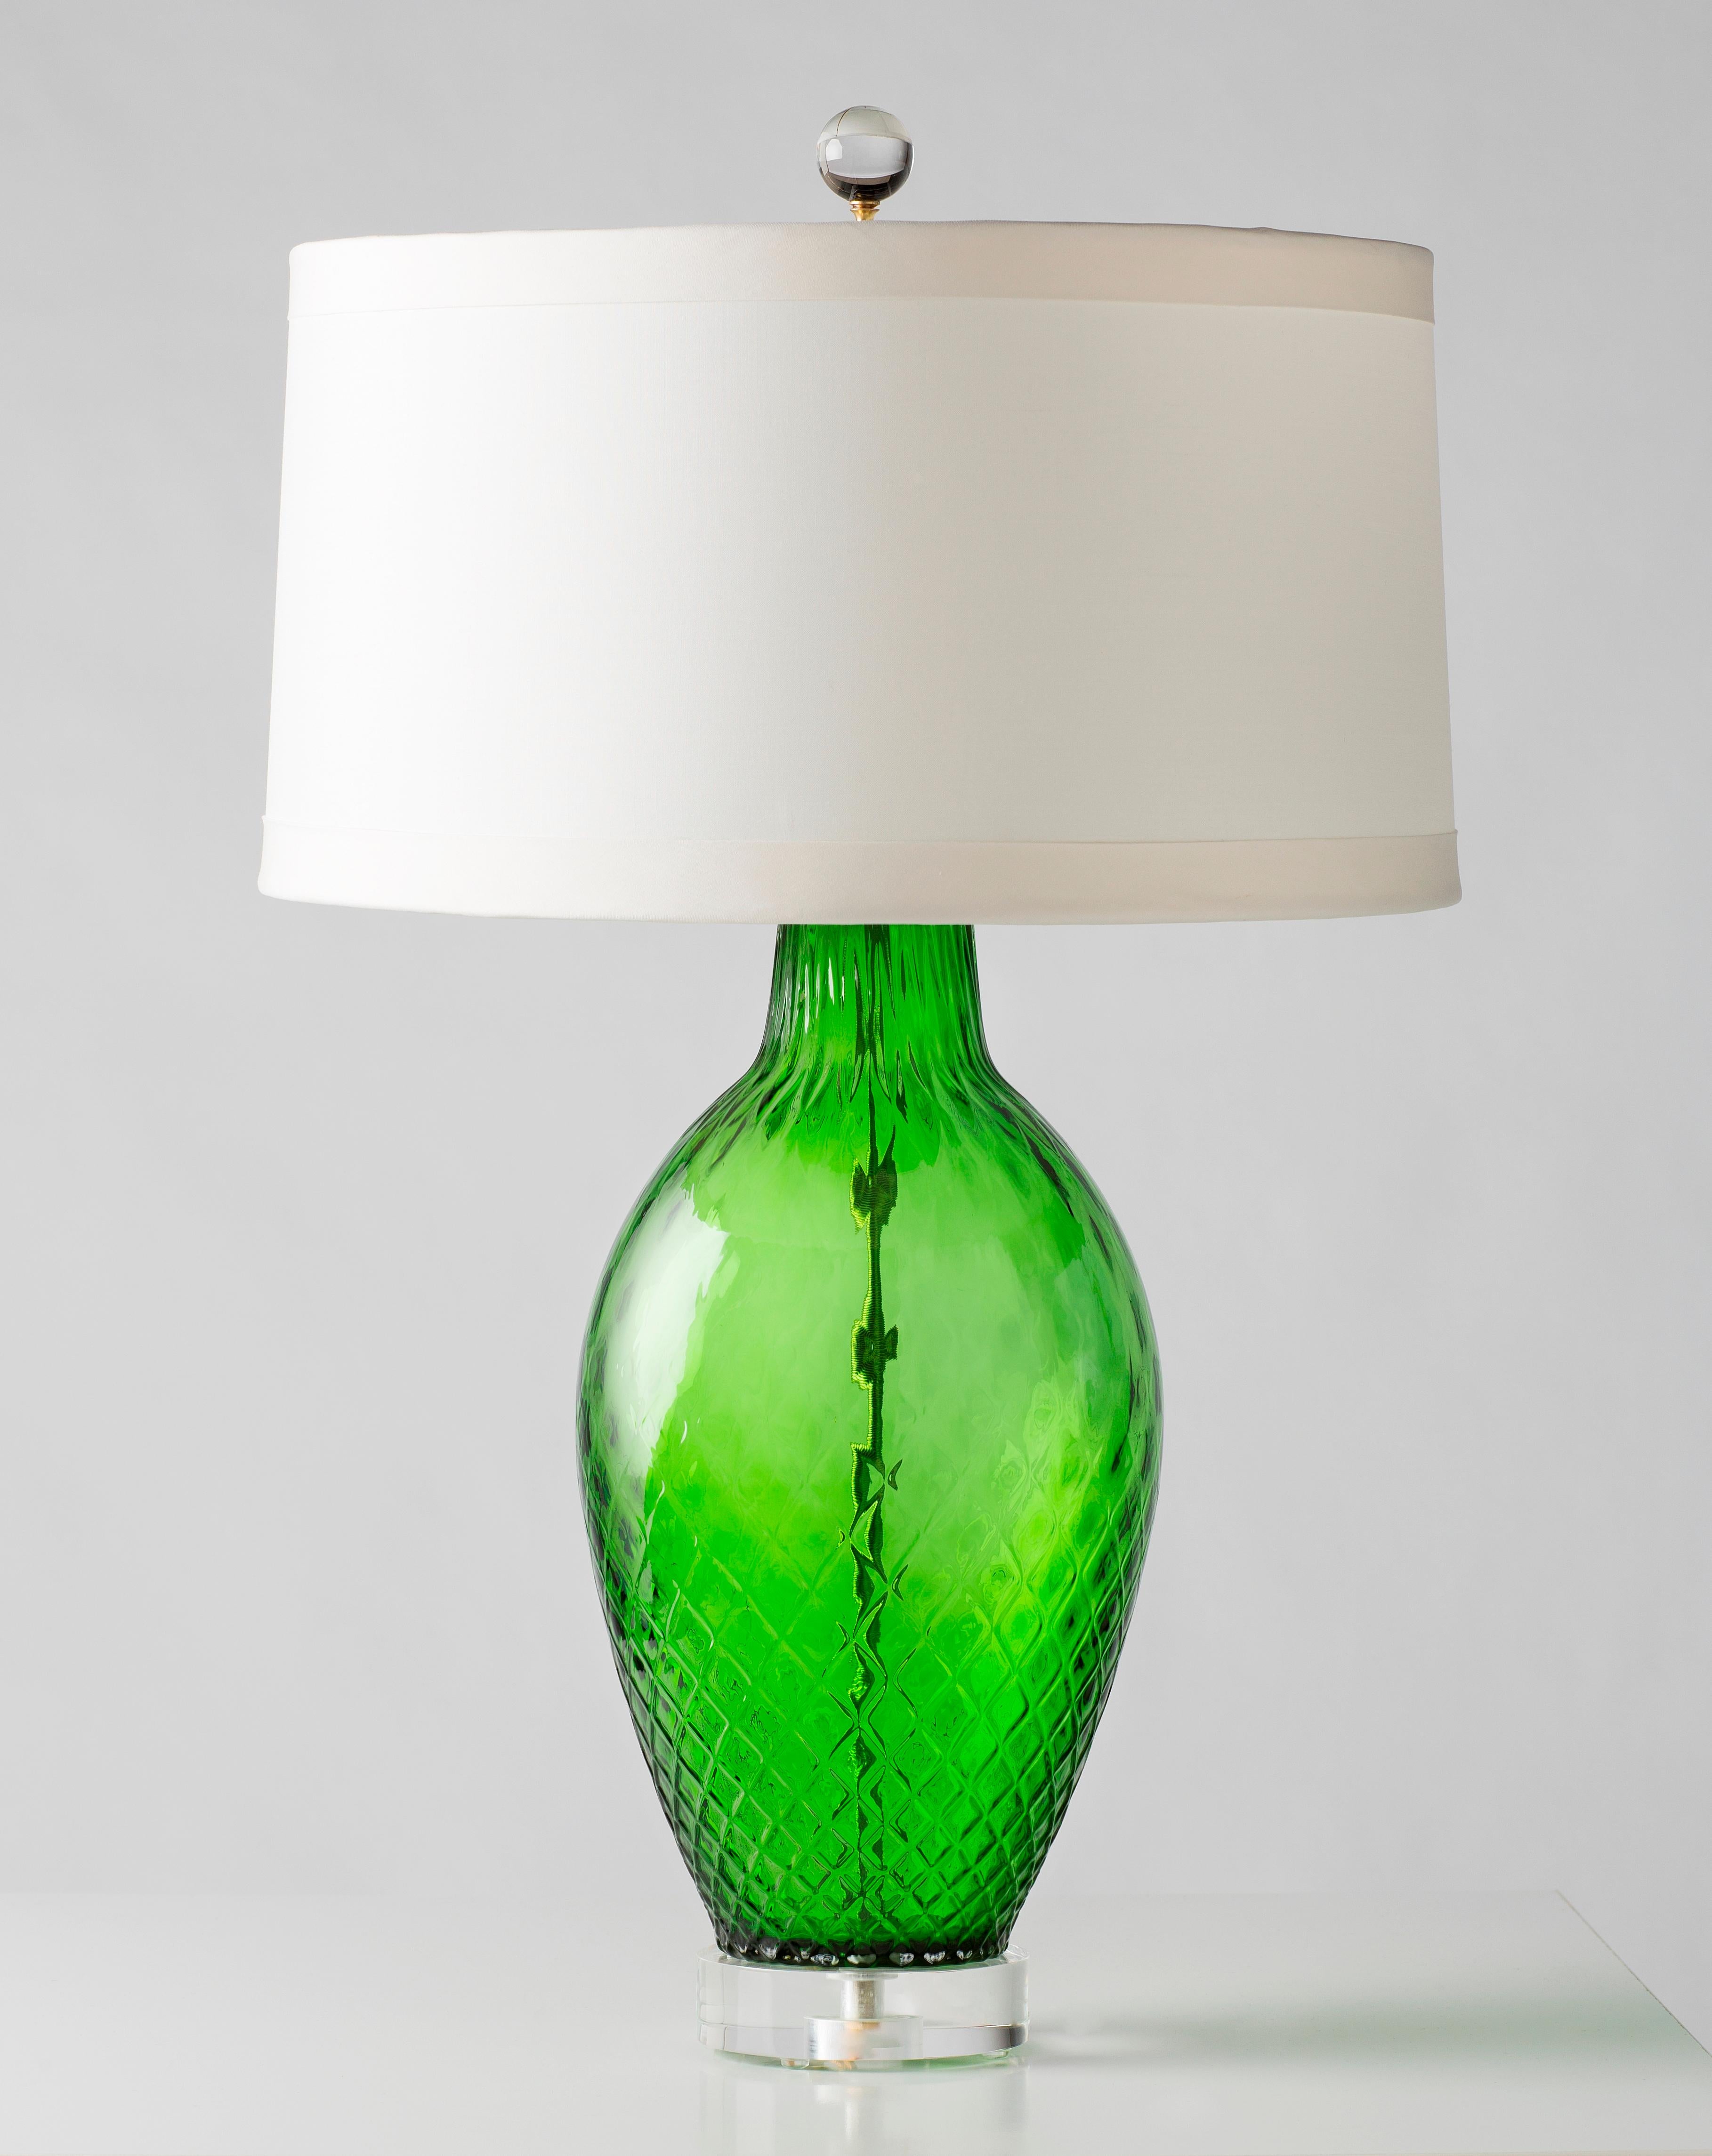 Ivory lacquer shade with gold foil interior, gold twisted cording, brass hardware and Lucite base. Three-way socket 50/100/150 watt.

This Murano lamp is handblown glass therefore overall dimensions, shape, color, and/or inclusions may slightly